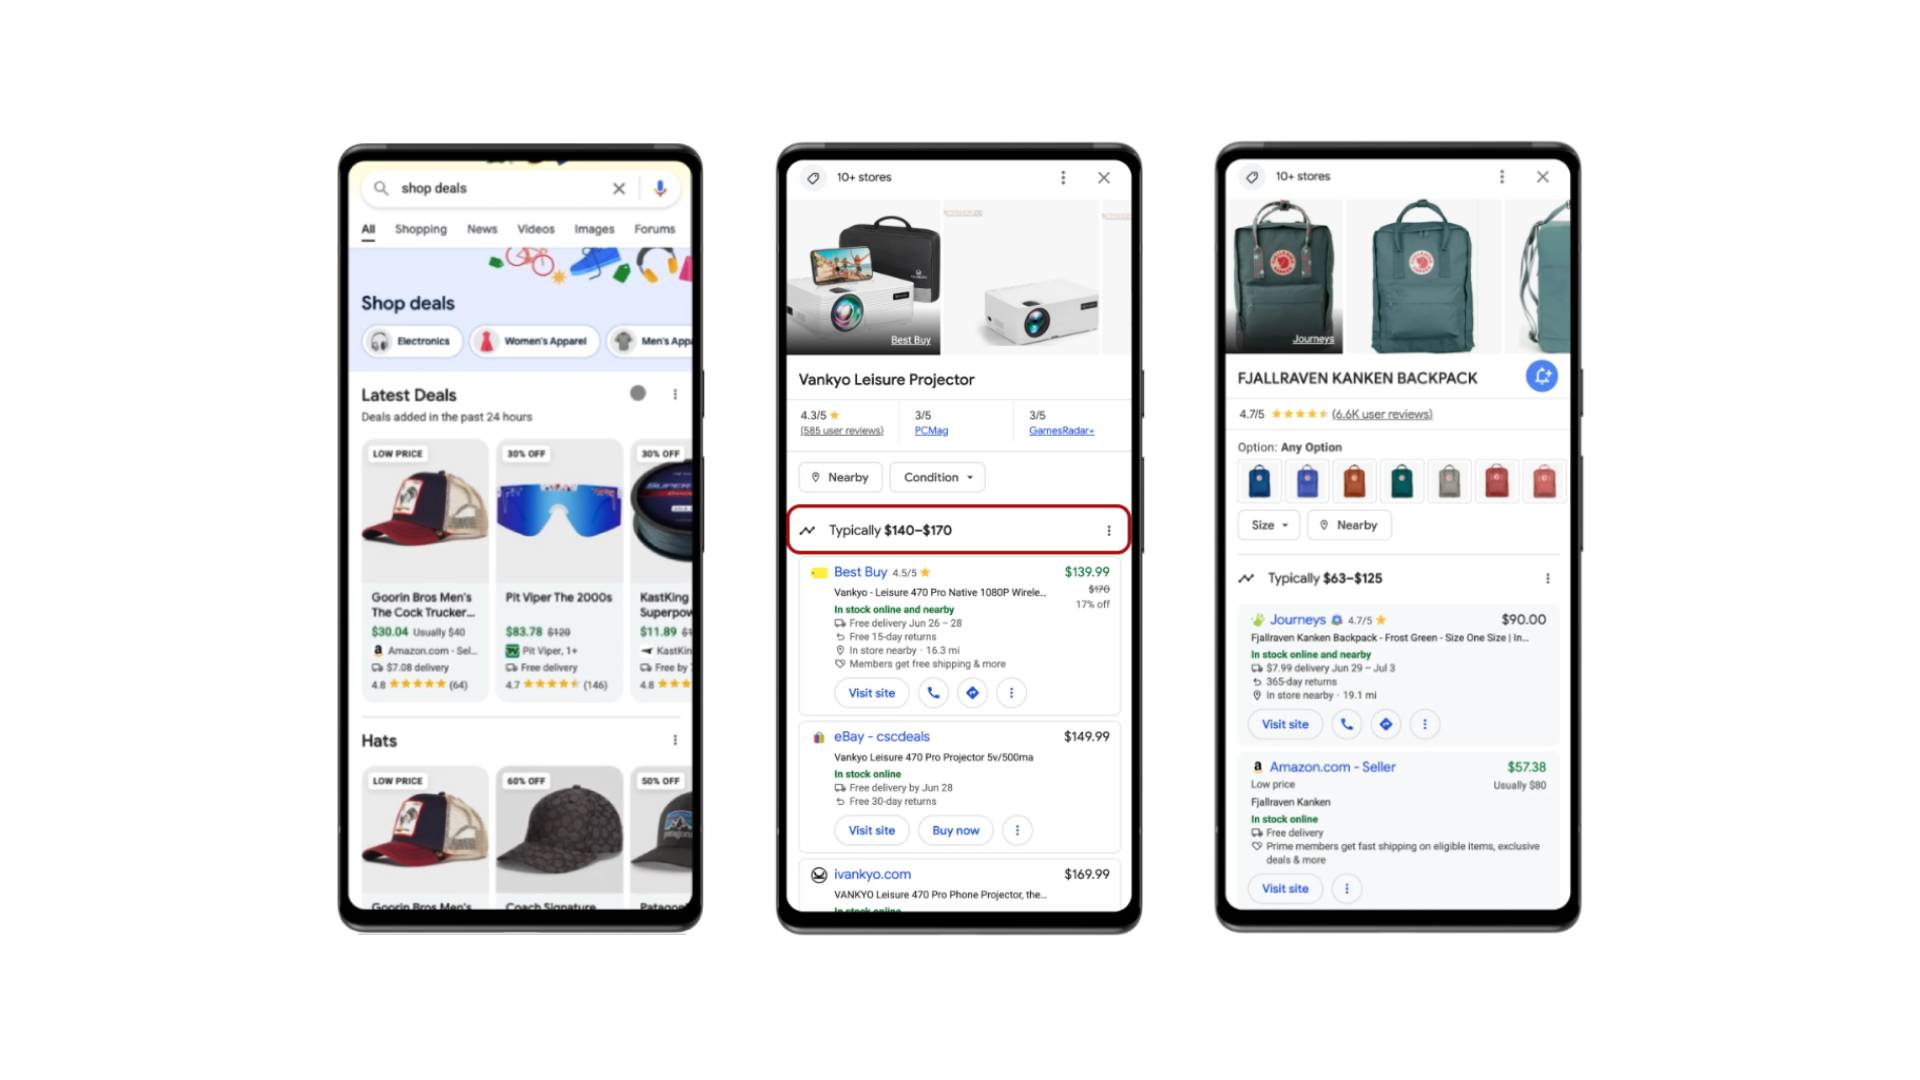 Screenshots showing new Google shopping tools on white background.